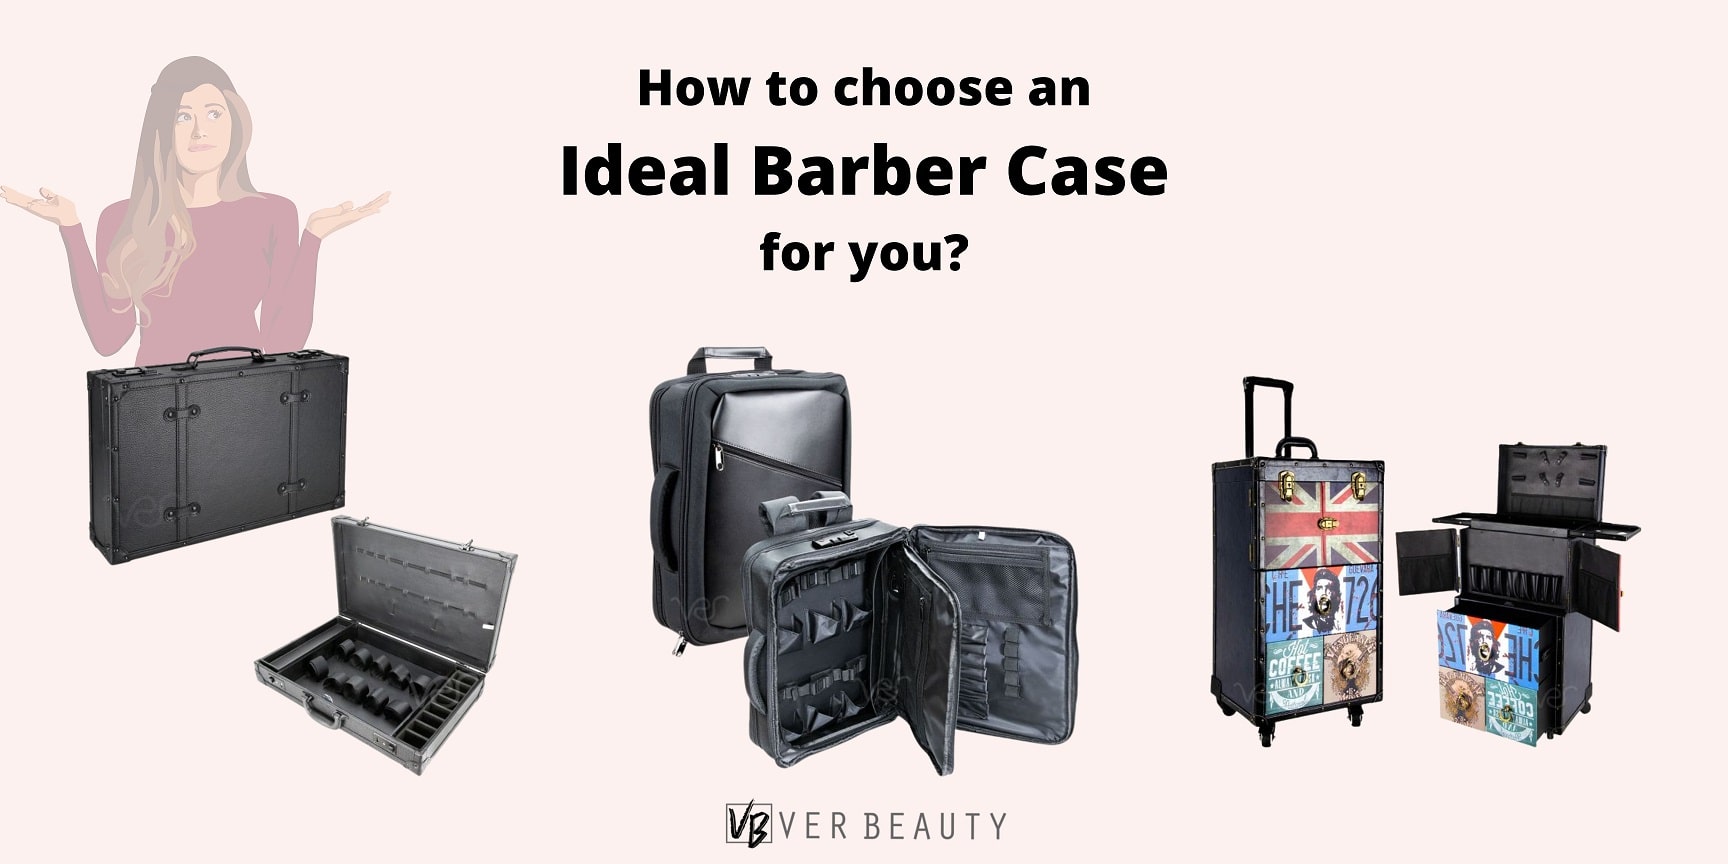 How to choose an Ideal Barber Case for you